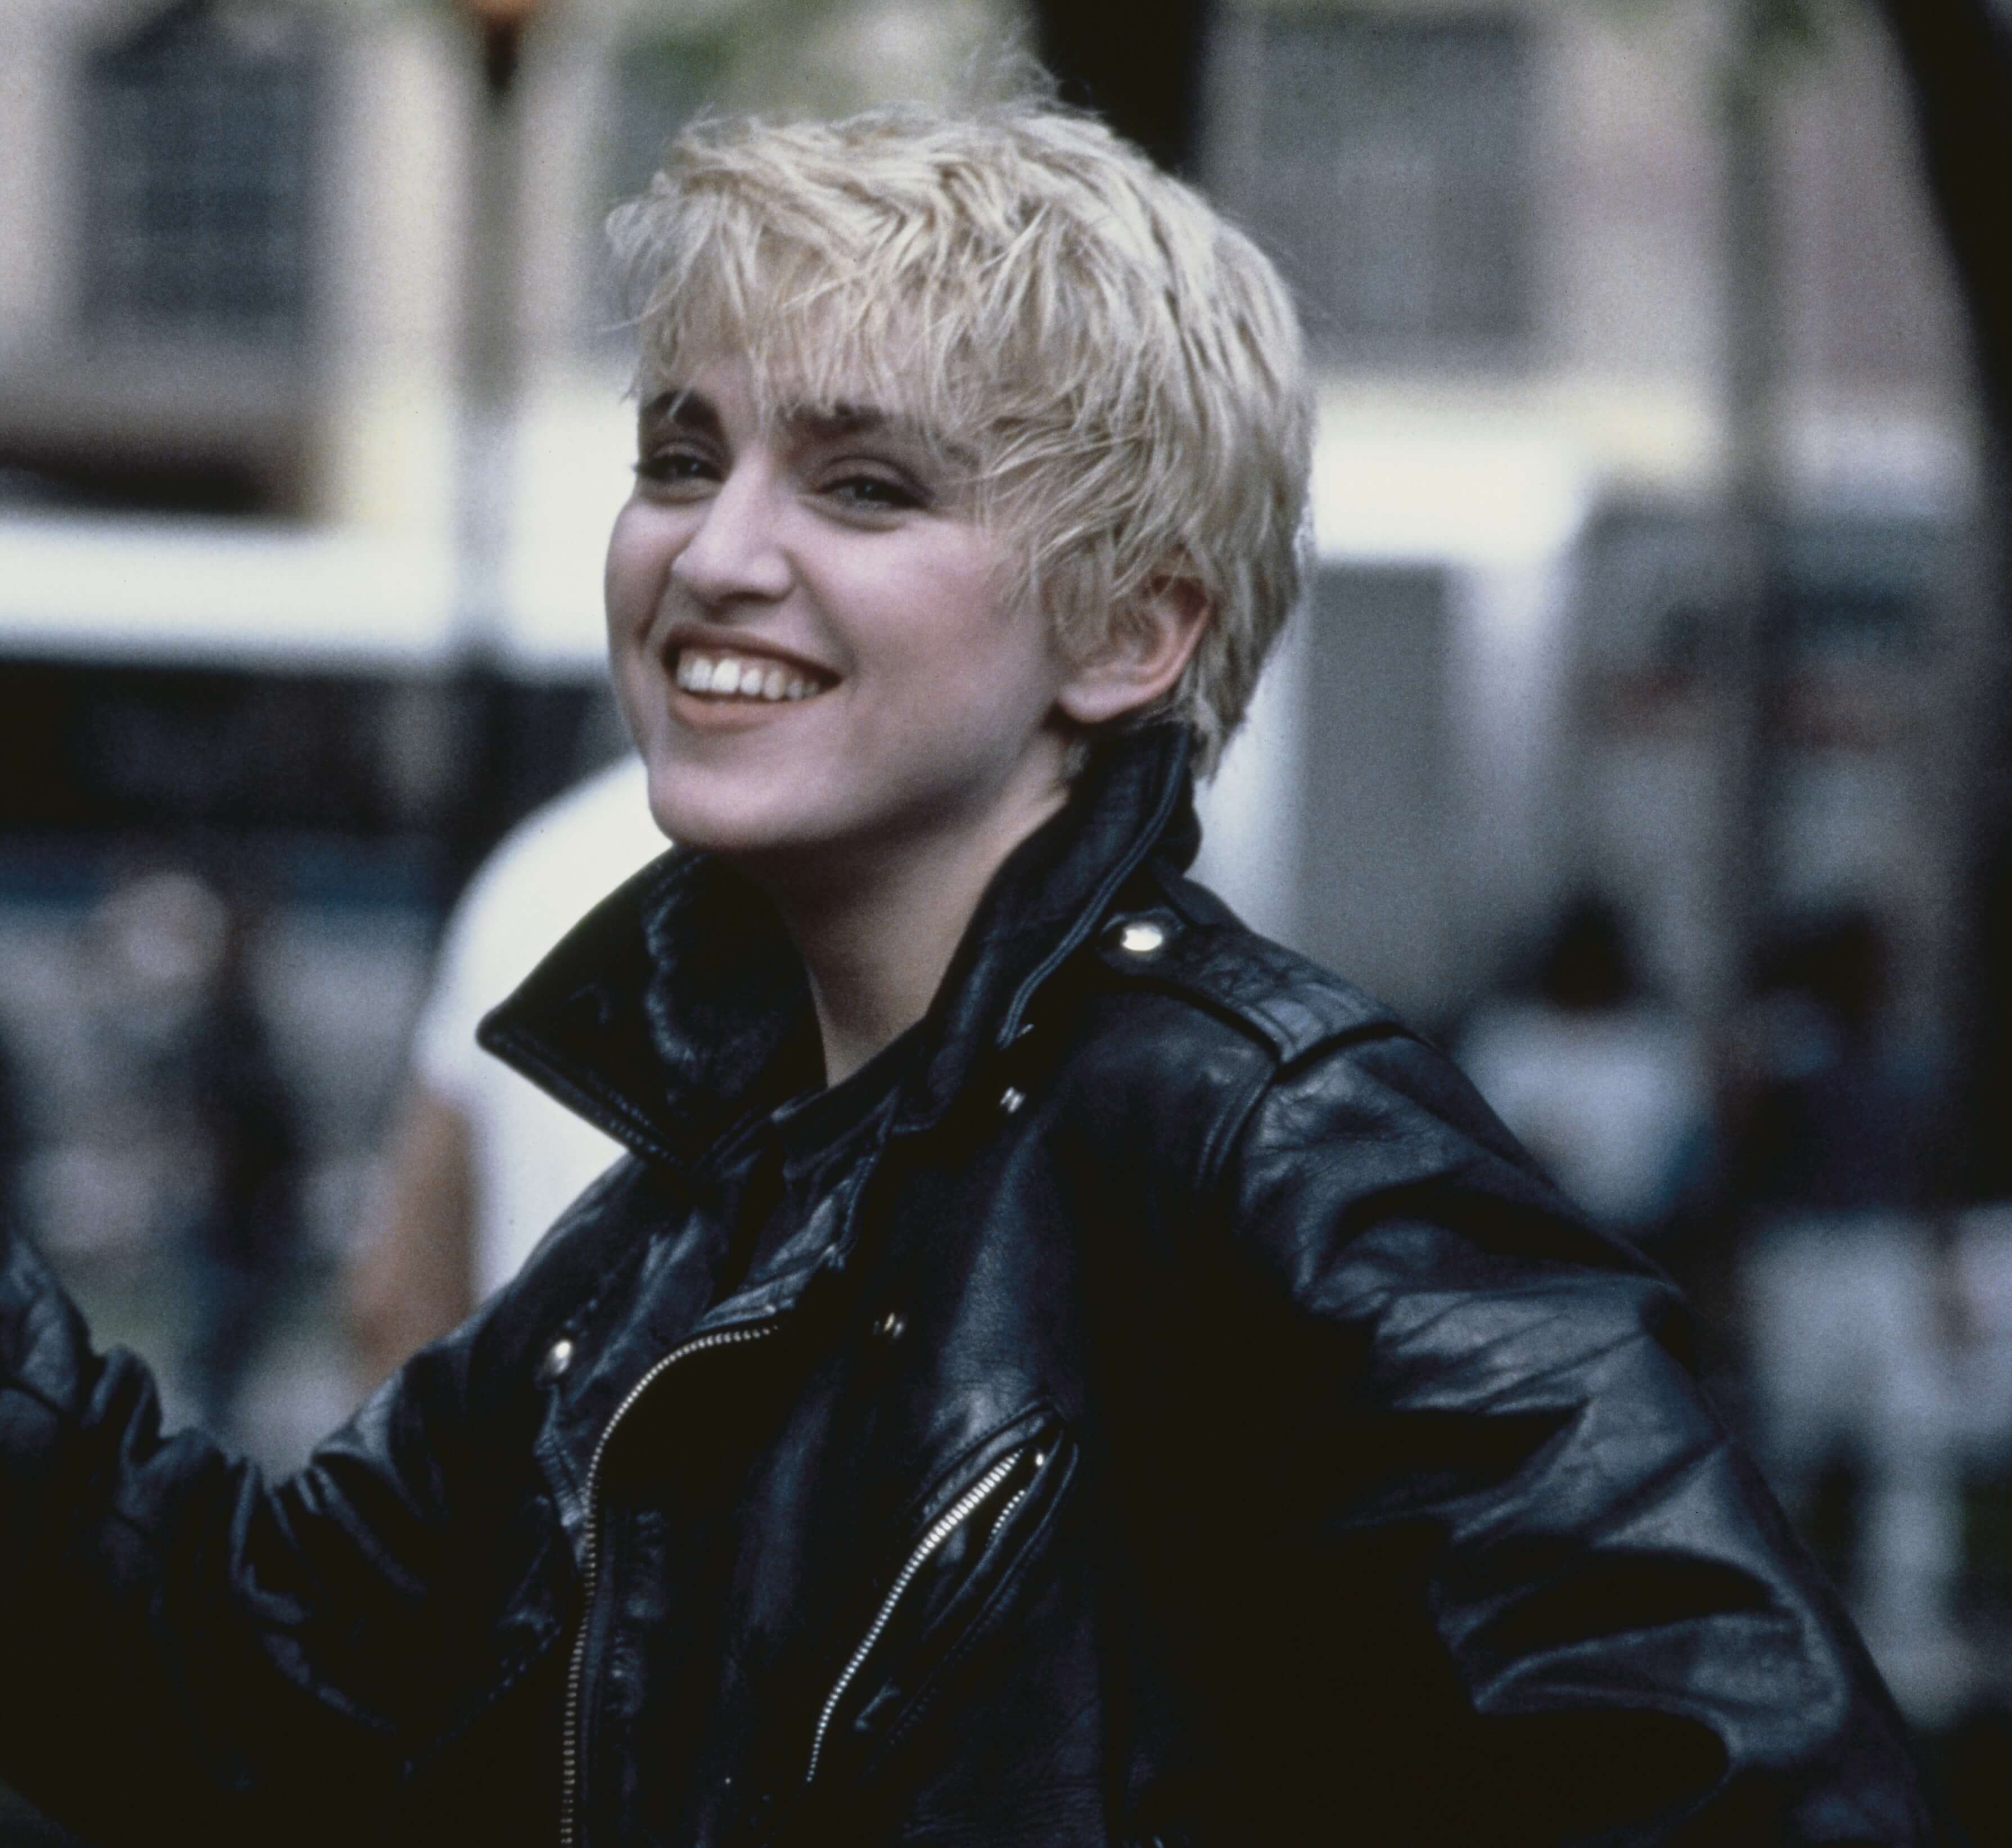 "Papa Don't Preach" singer Madonna in a leather jacket